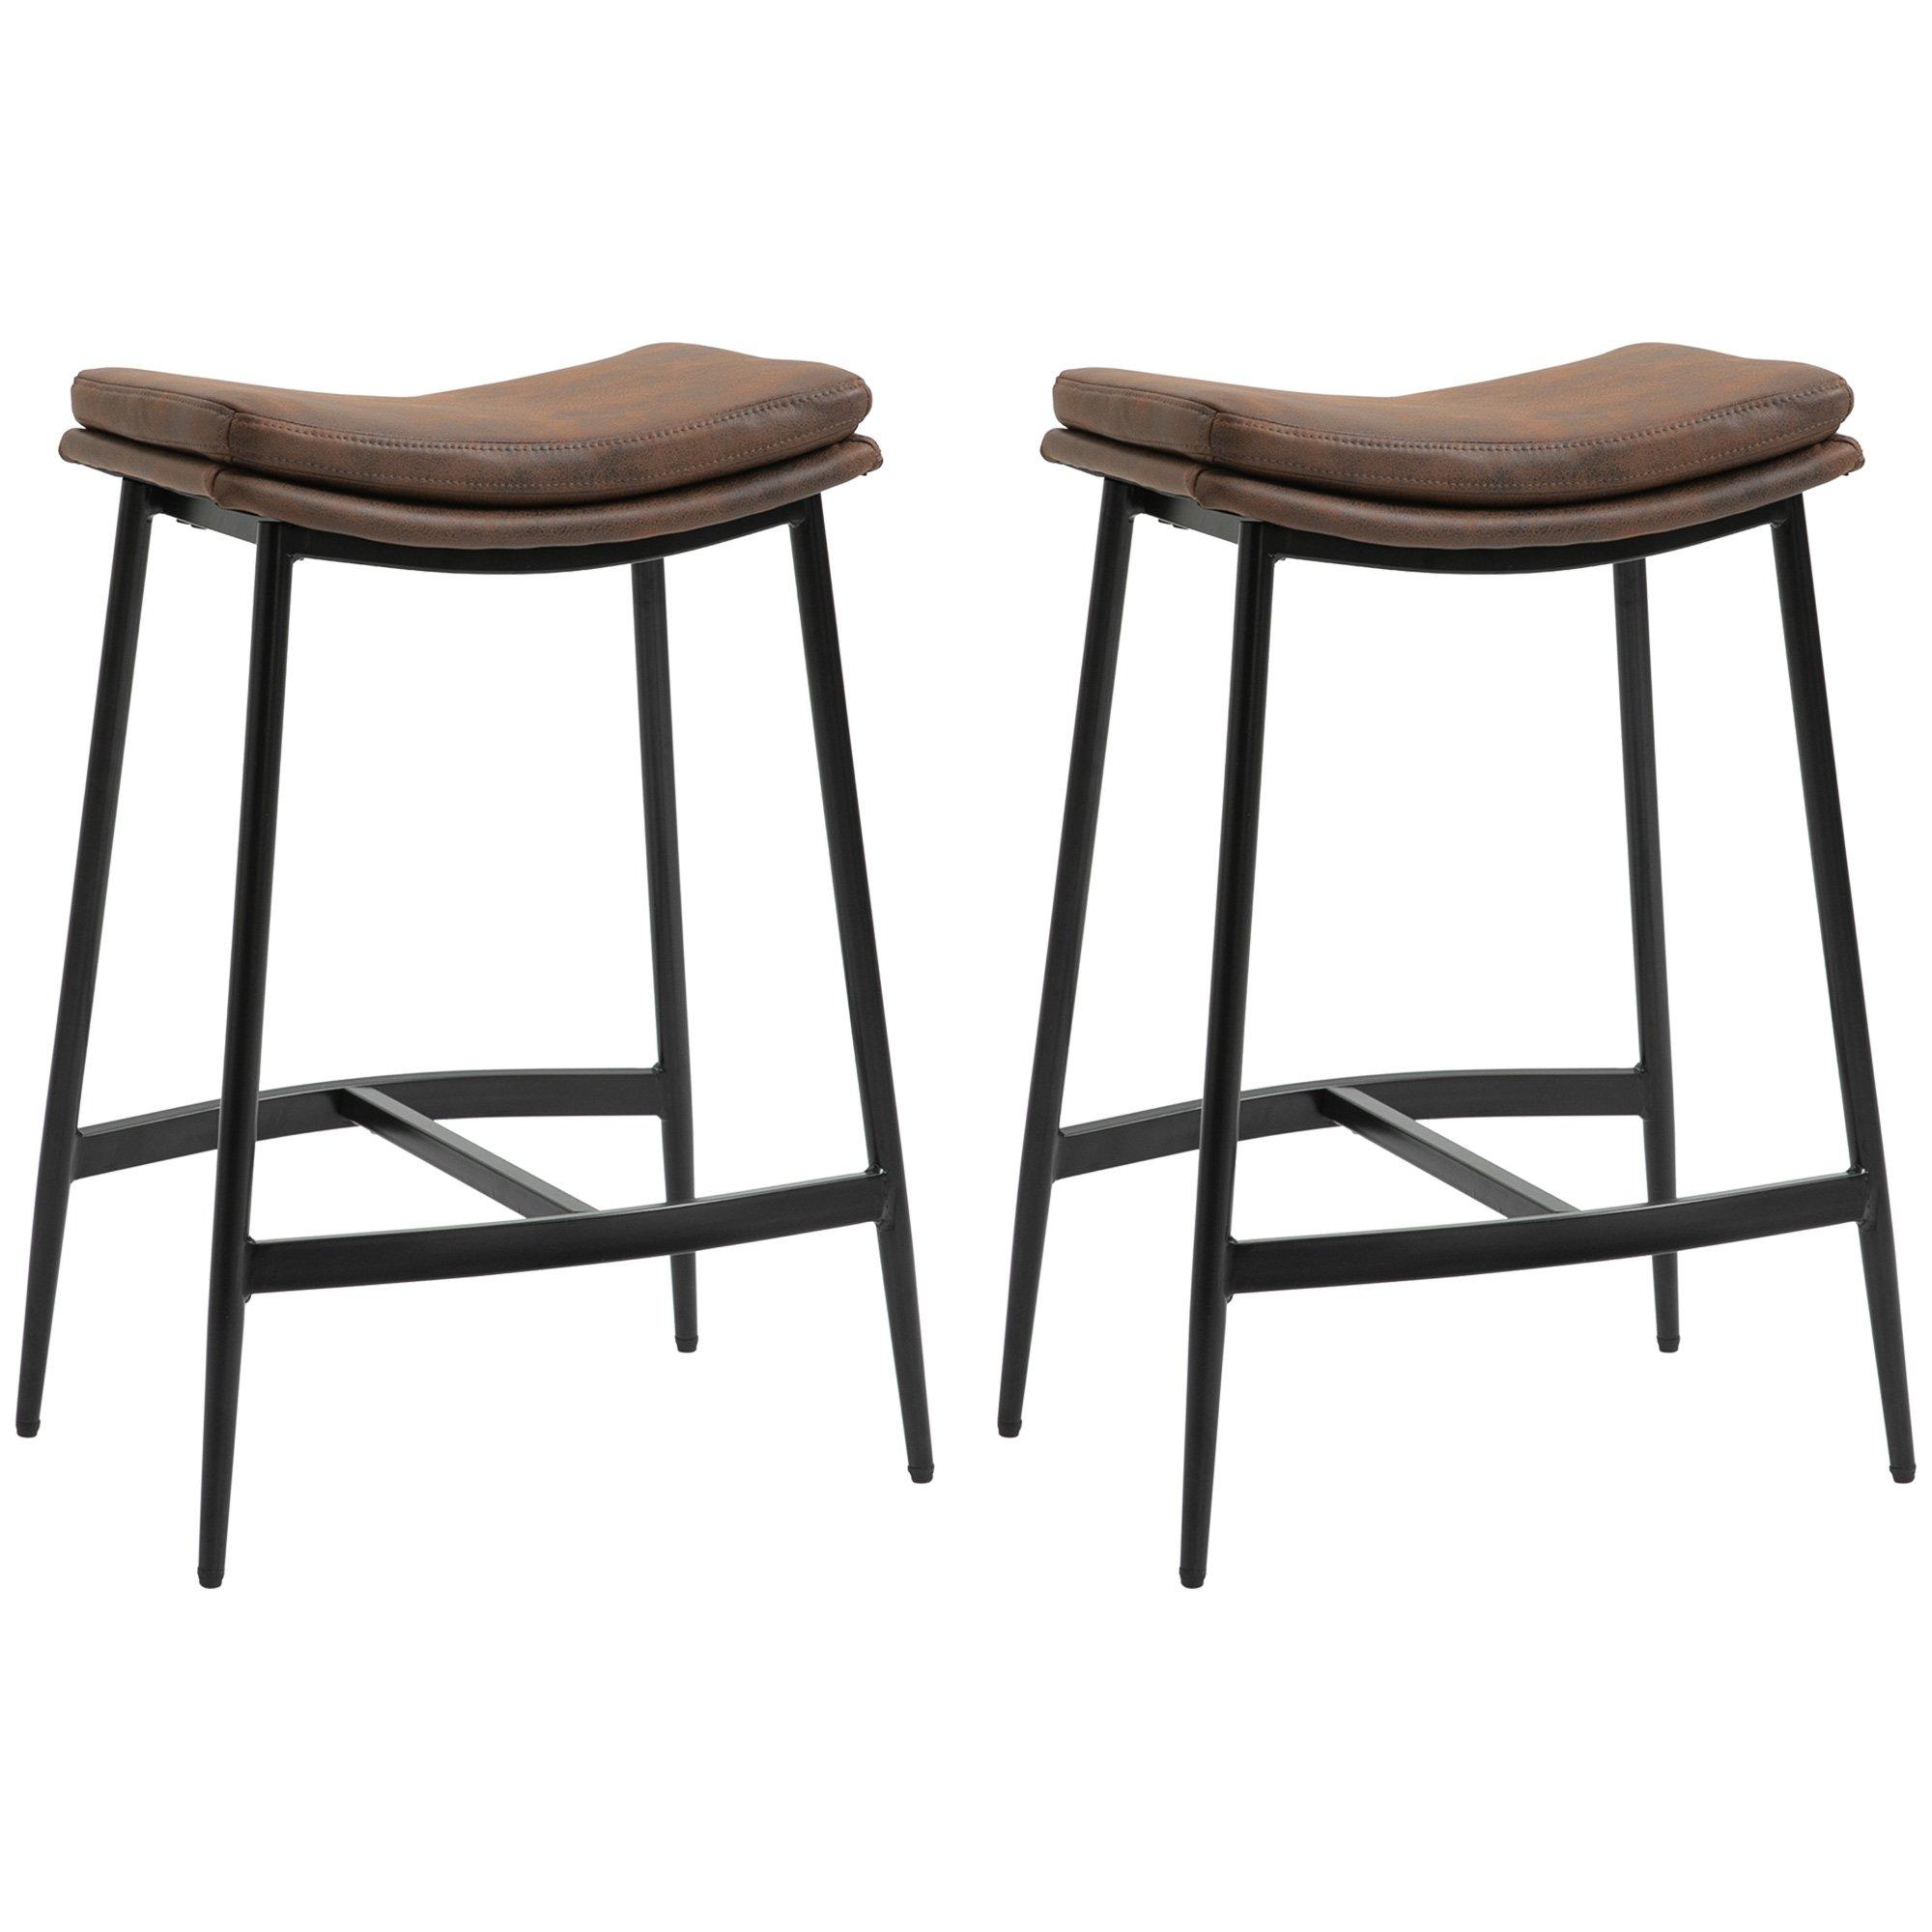 Industrial Bar Stools Set of 2 Kitchen Stools for Dining Room Kitchen